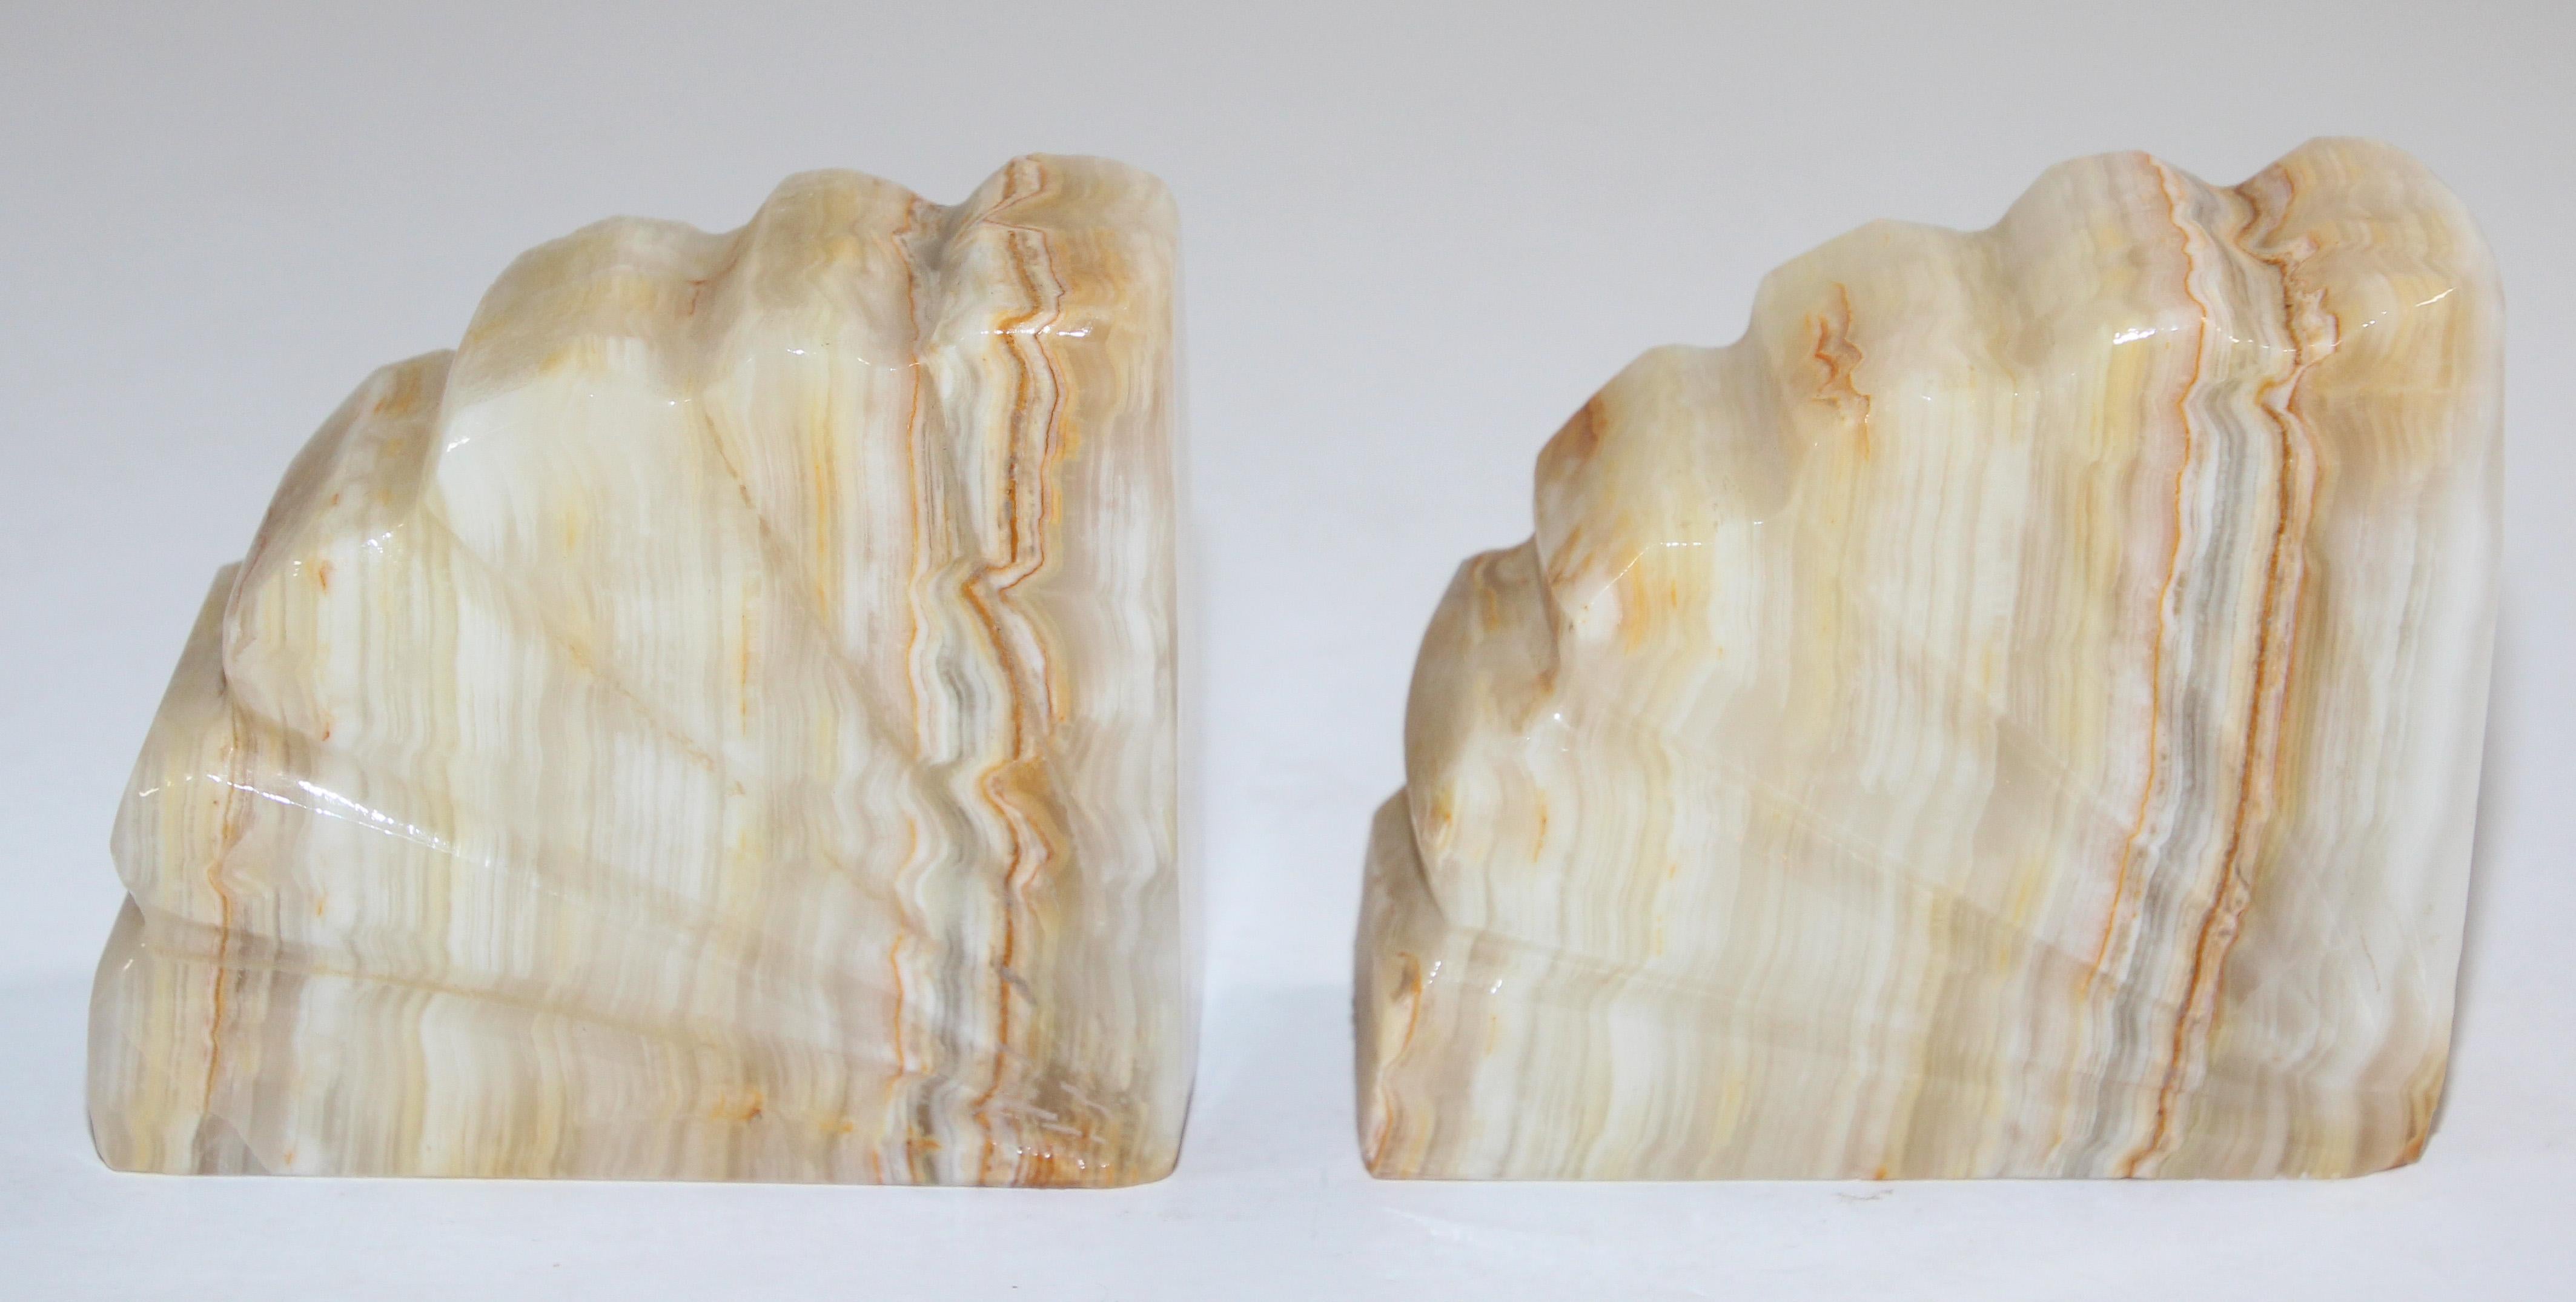 20th Century Art Deco Marble Bookends Hand Carved Scallop Shell Design, French, Ca 1940s